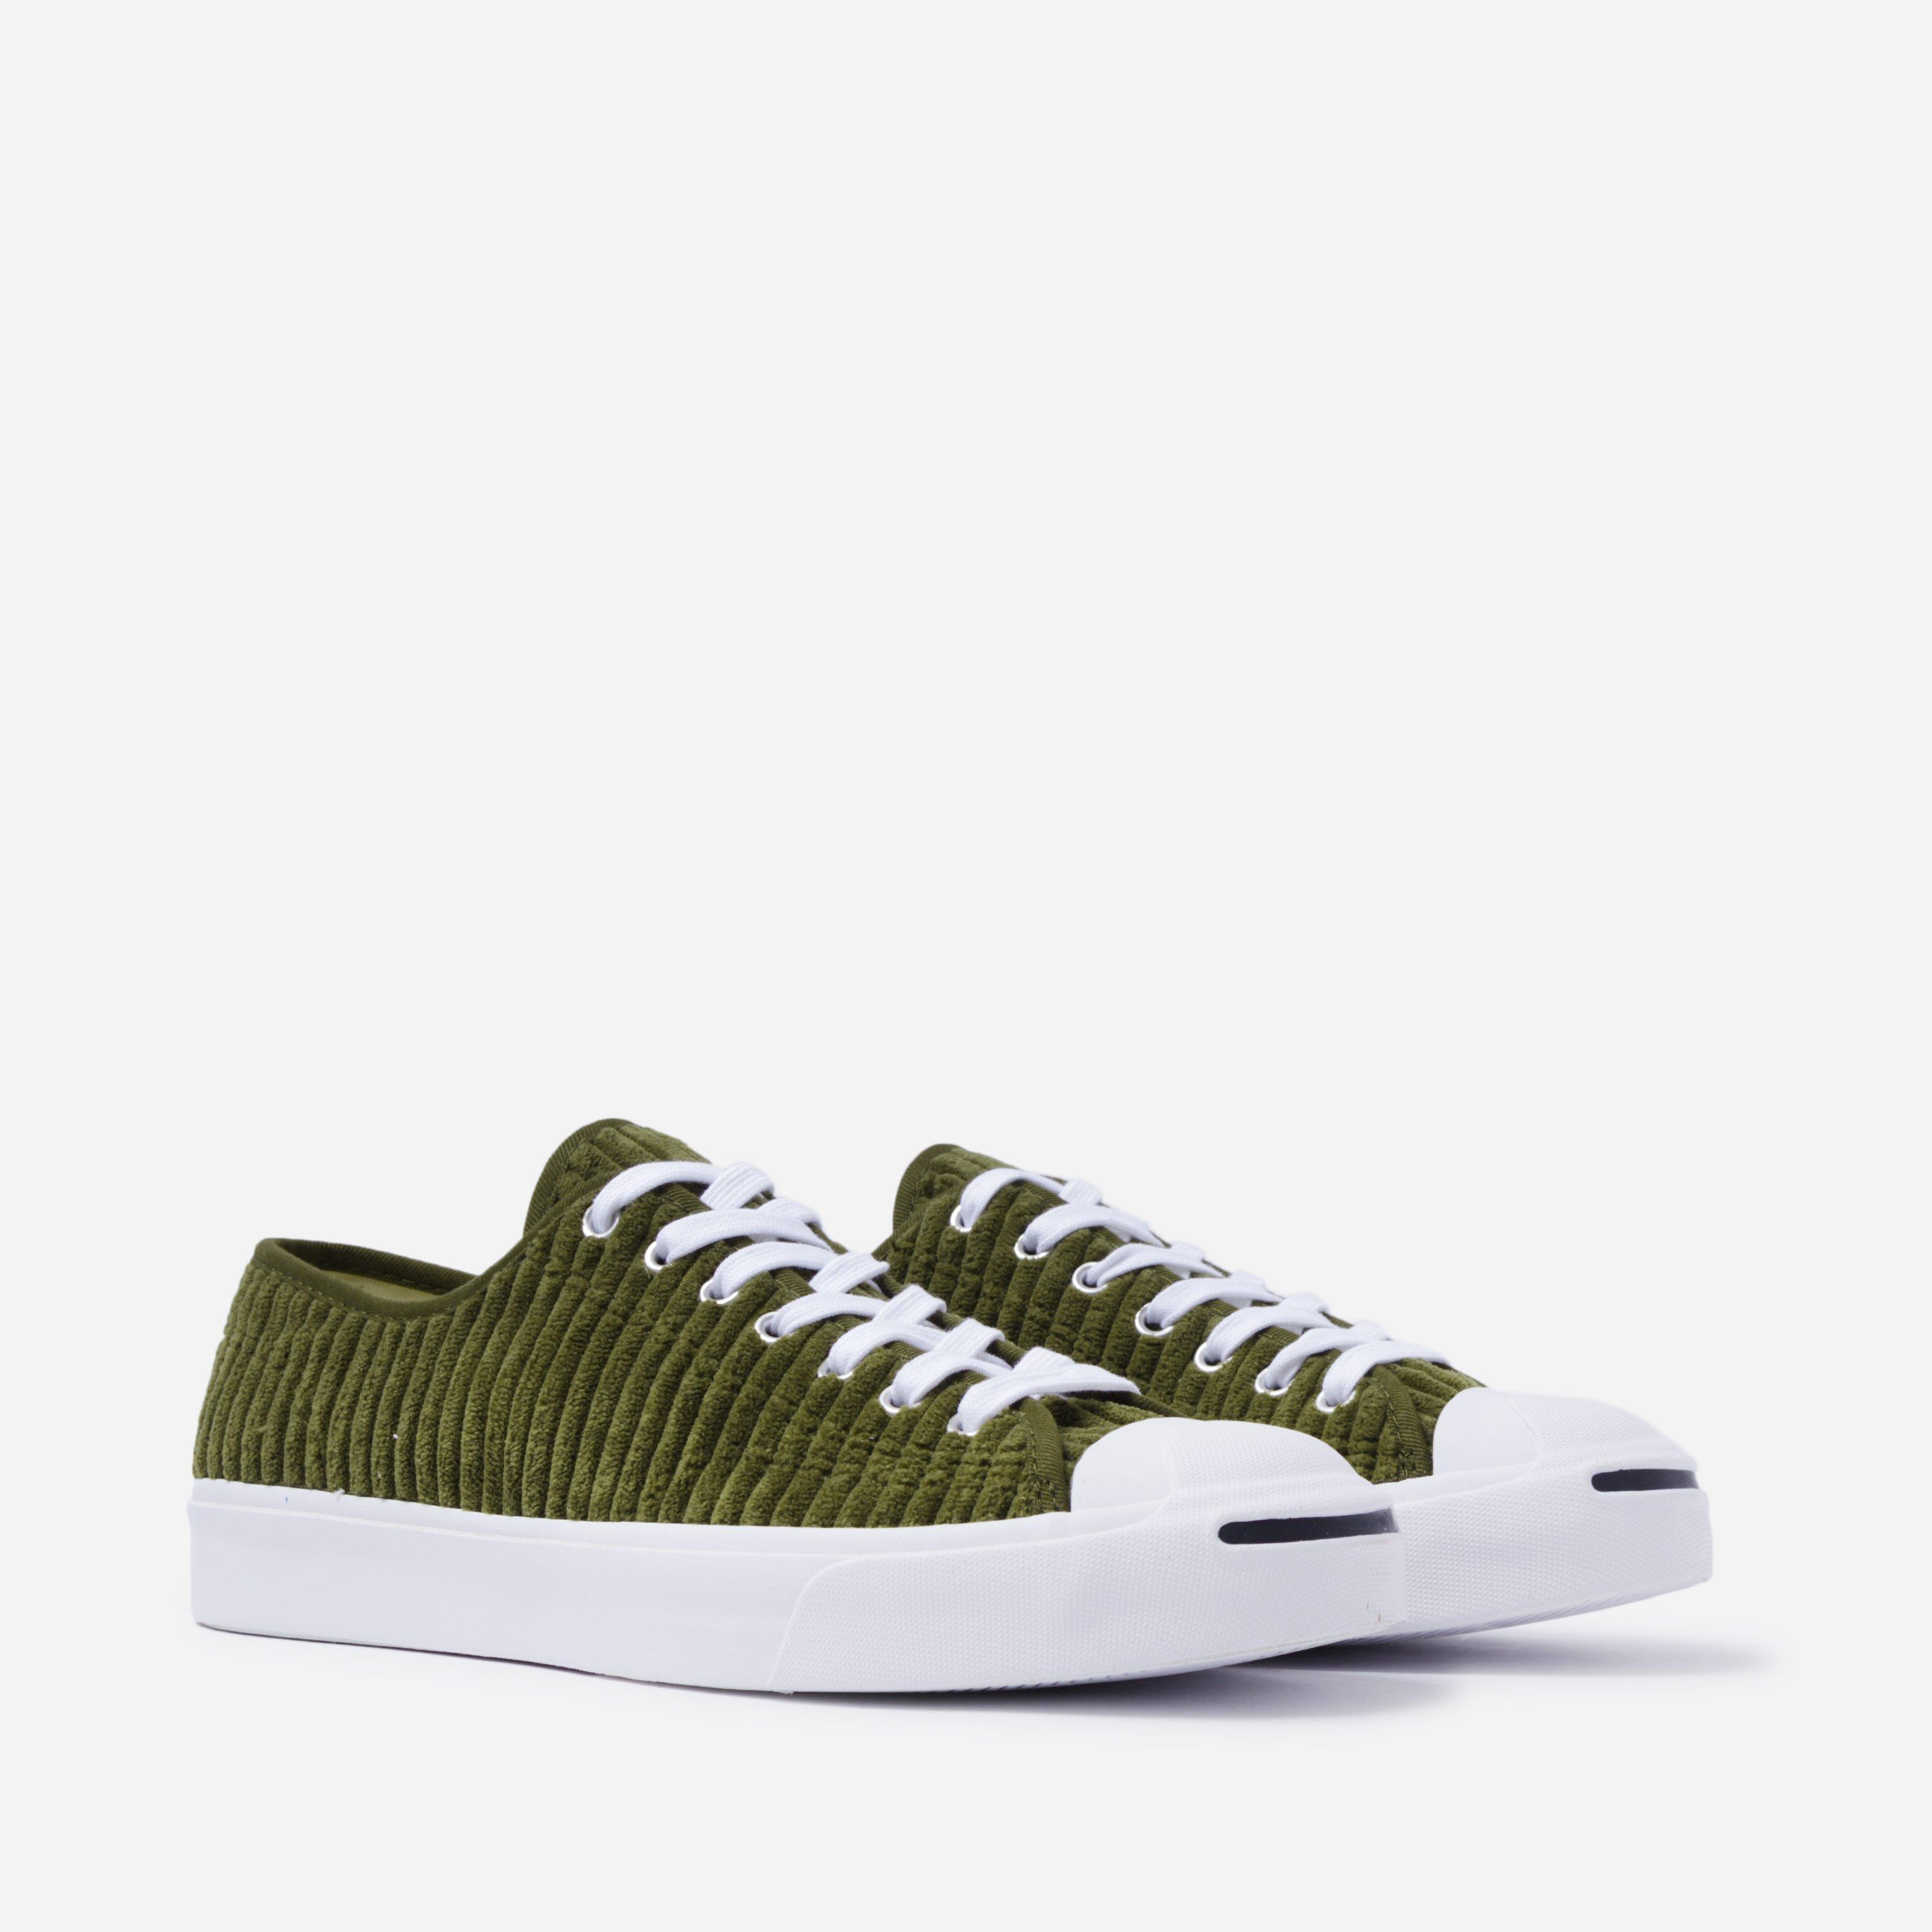 Converse Jack Purcell Wide Wale Cord in Green for Men - Save 60% - Lyst